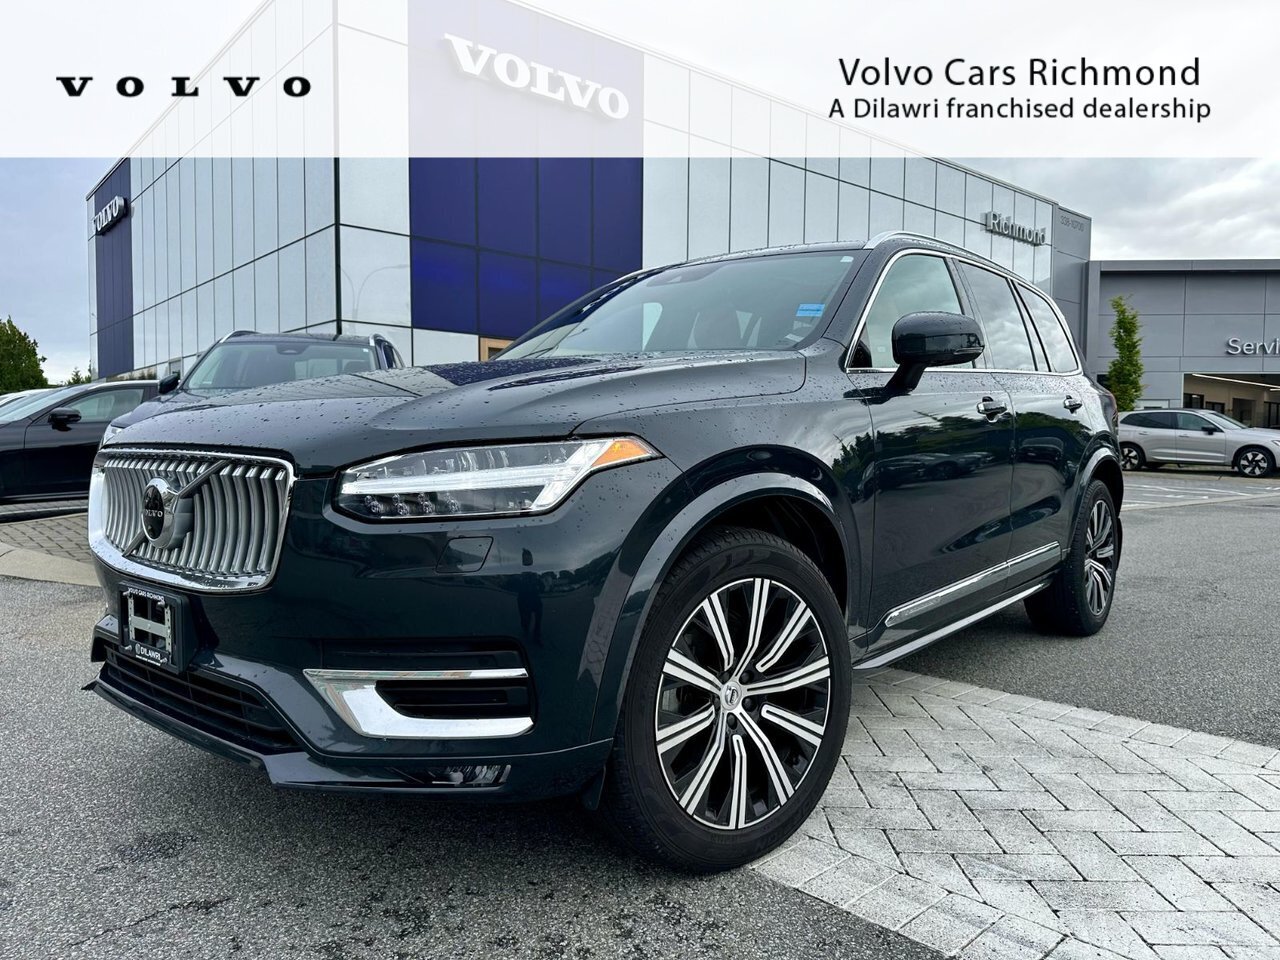 2020 Volvo XC90 T6 AWD Inscription (7-Seat) | Finance from 3.99% O